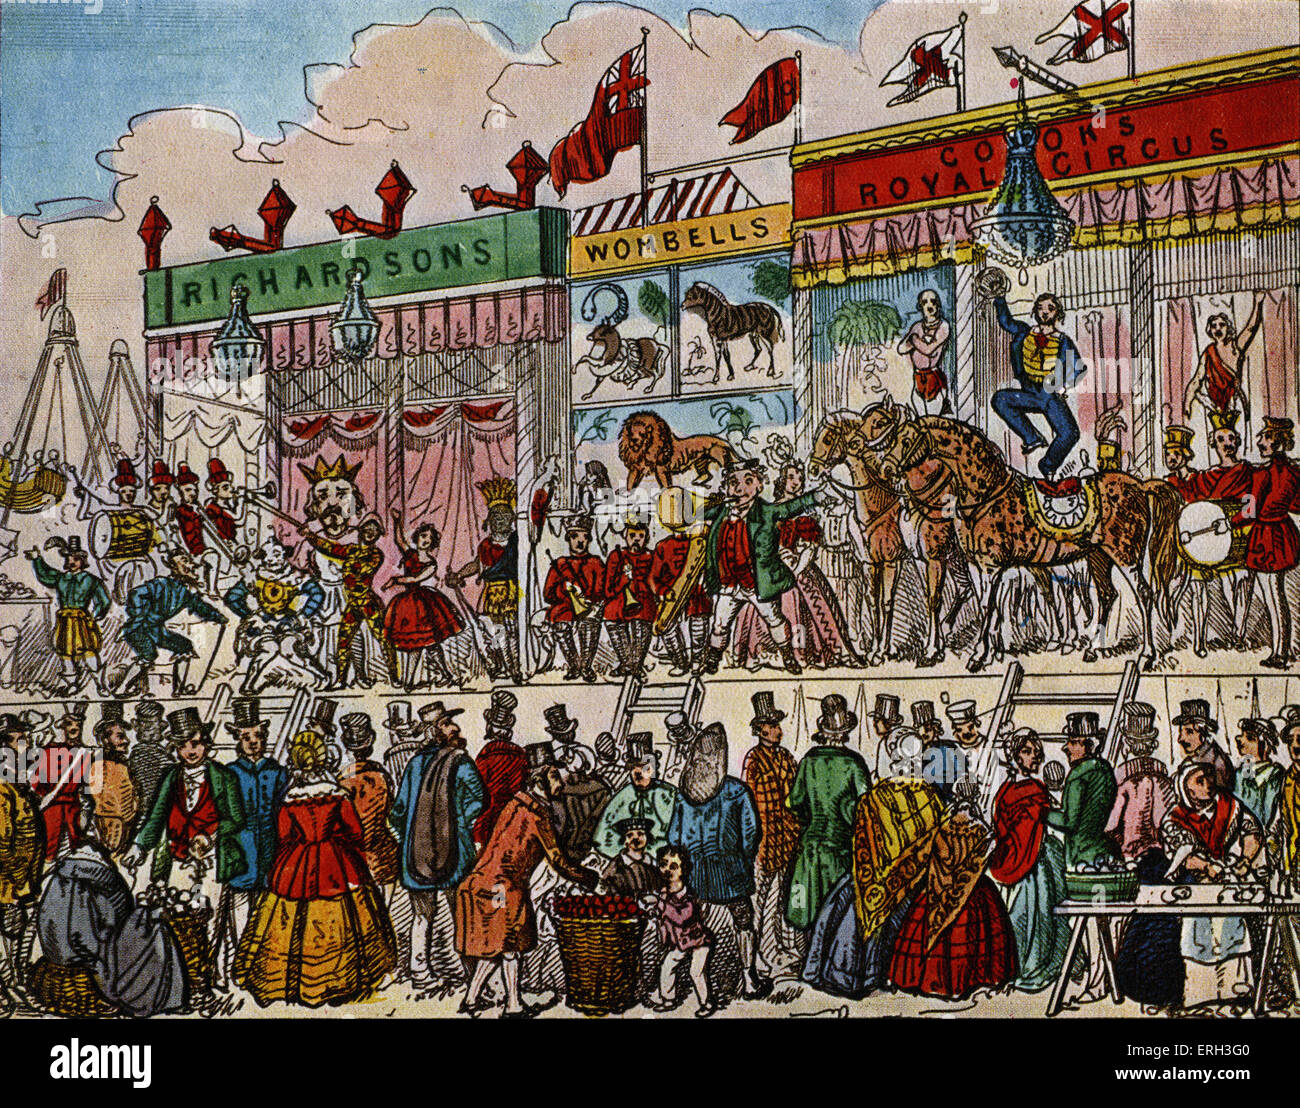 Scenes from 'Harlequin Red Riding-Hood' by Tom Hood.  Crowd watches a circus perform on stage.  TH British humourist and Stock Photo